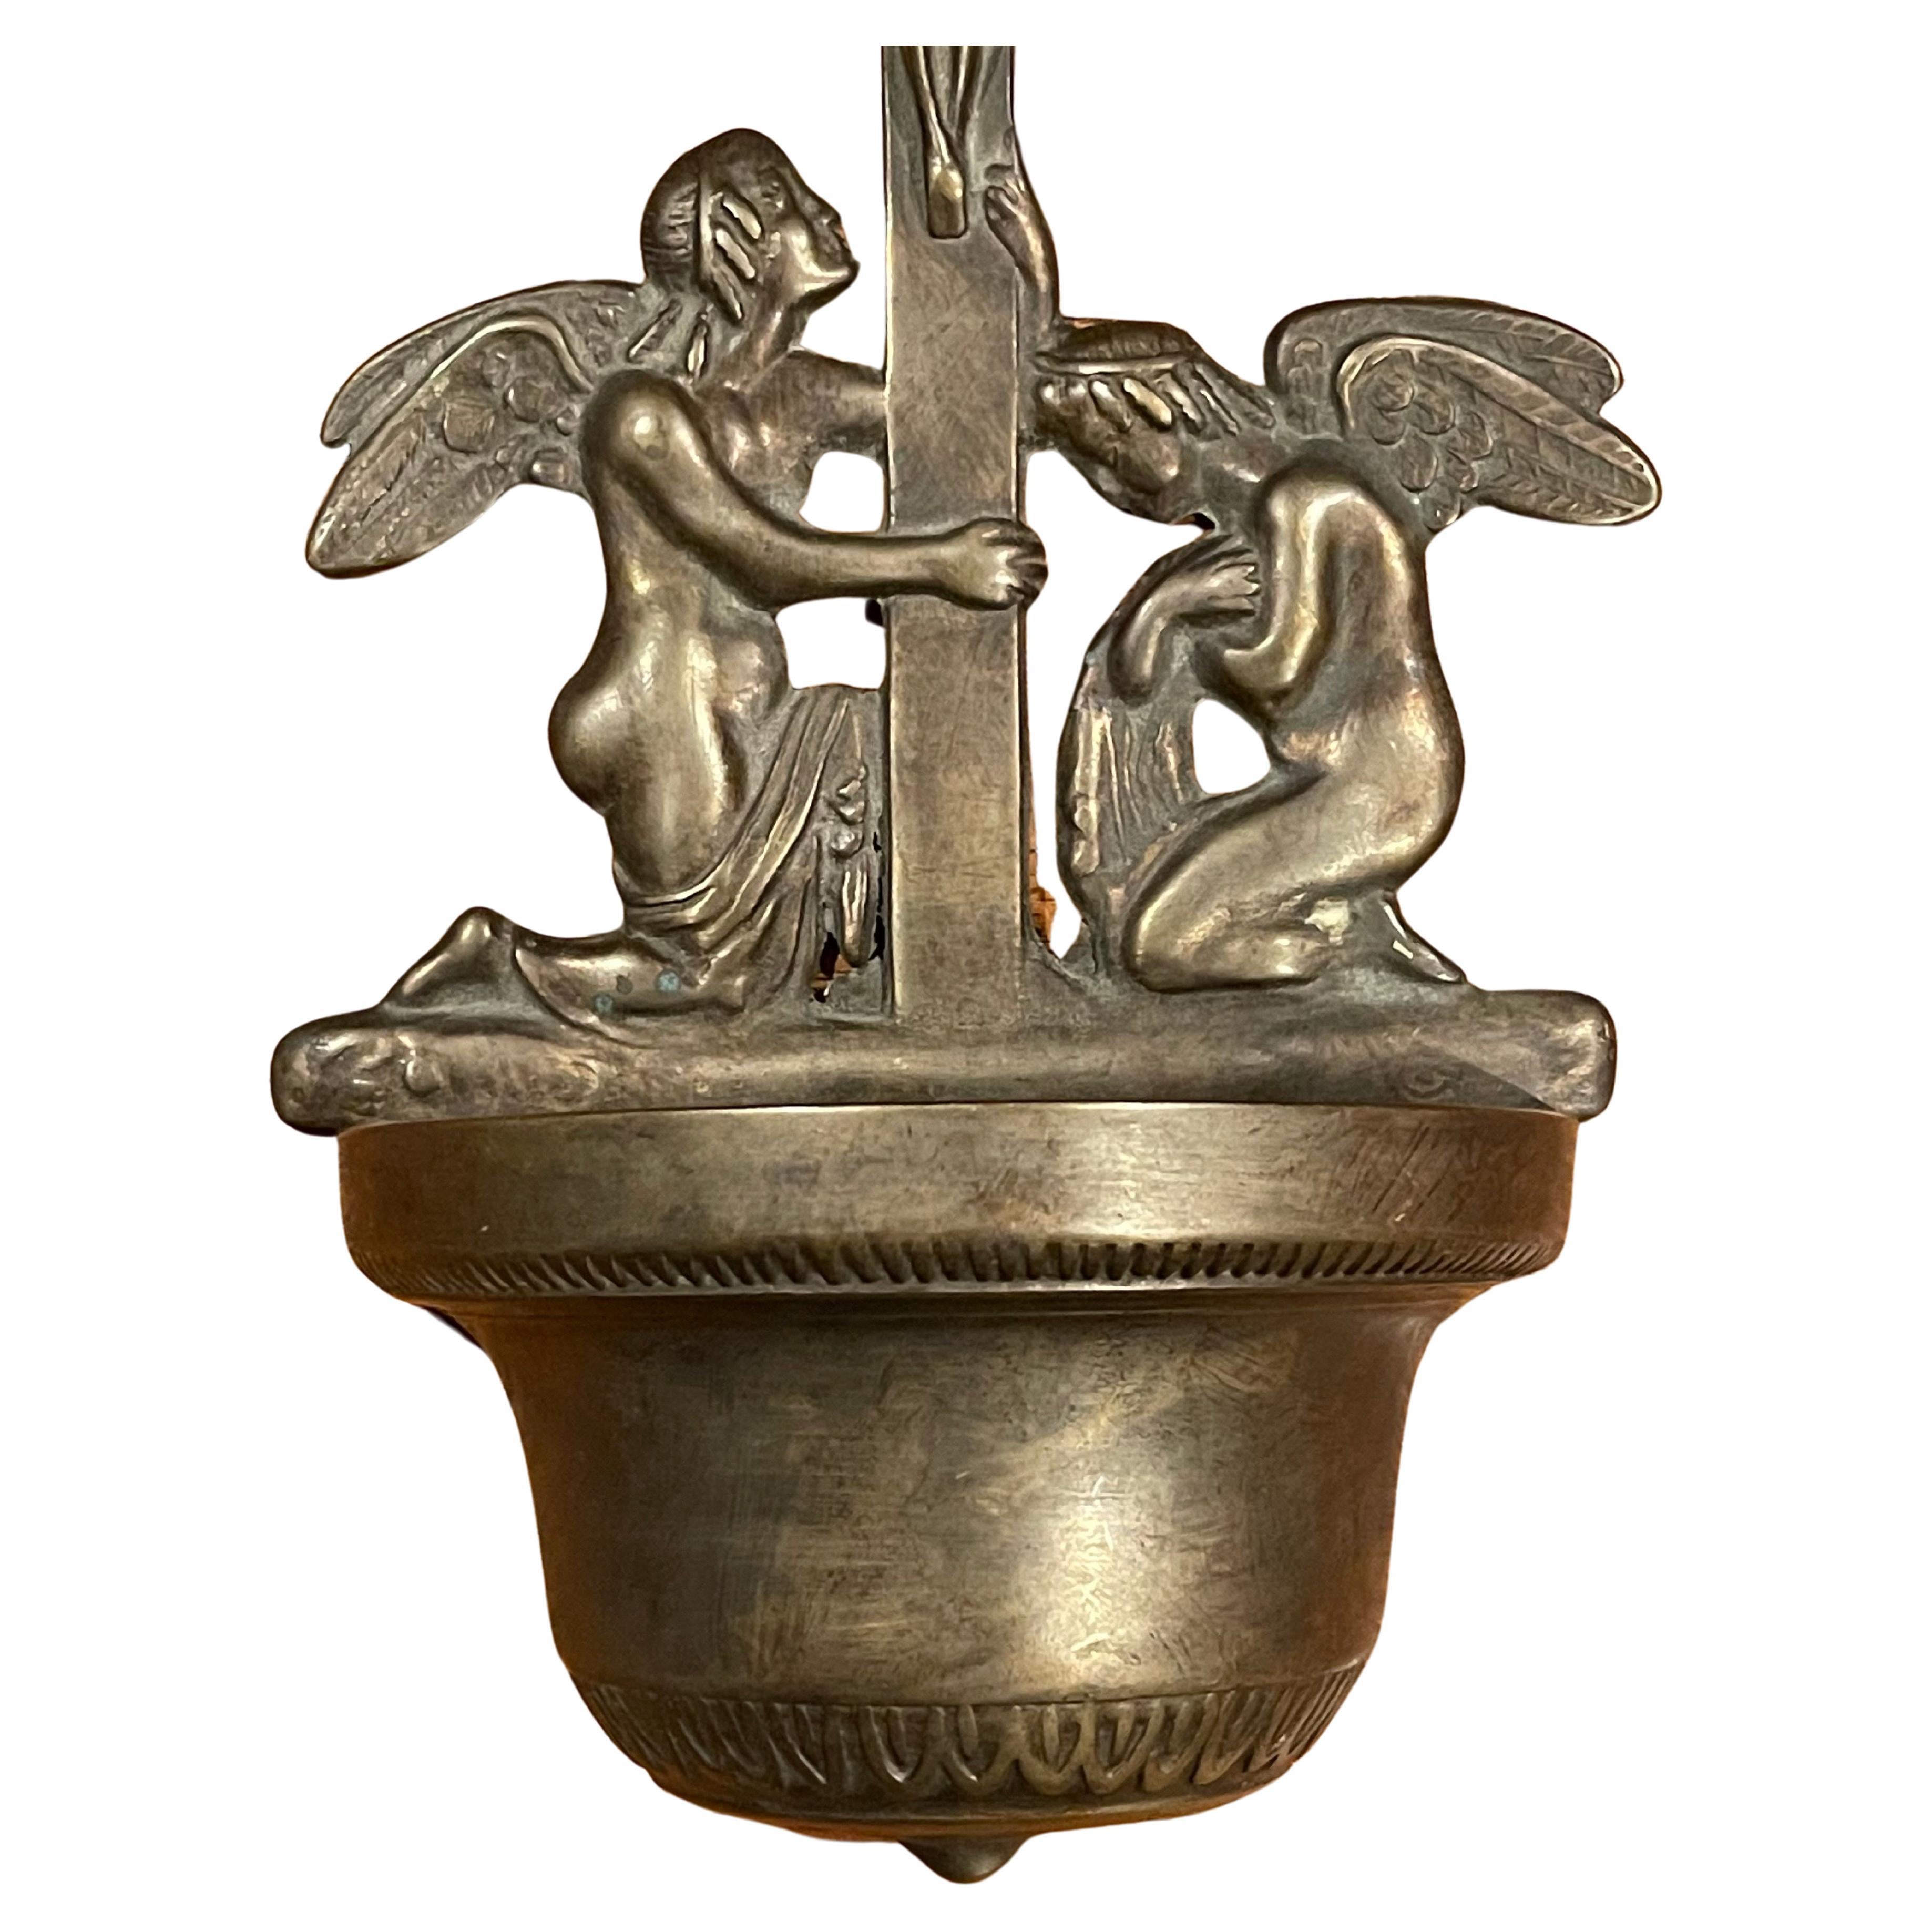 Vintage bronze Italian holy water bowl / dispenser, circa 1980s. The bowl is in good vintage condition and measures 6.25